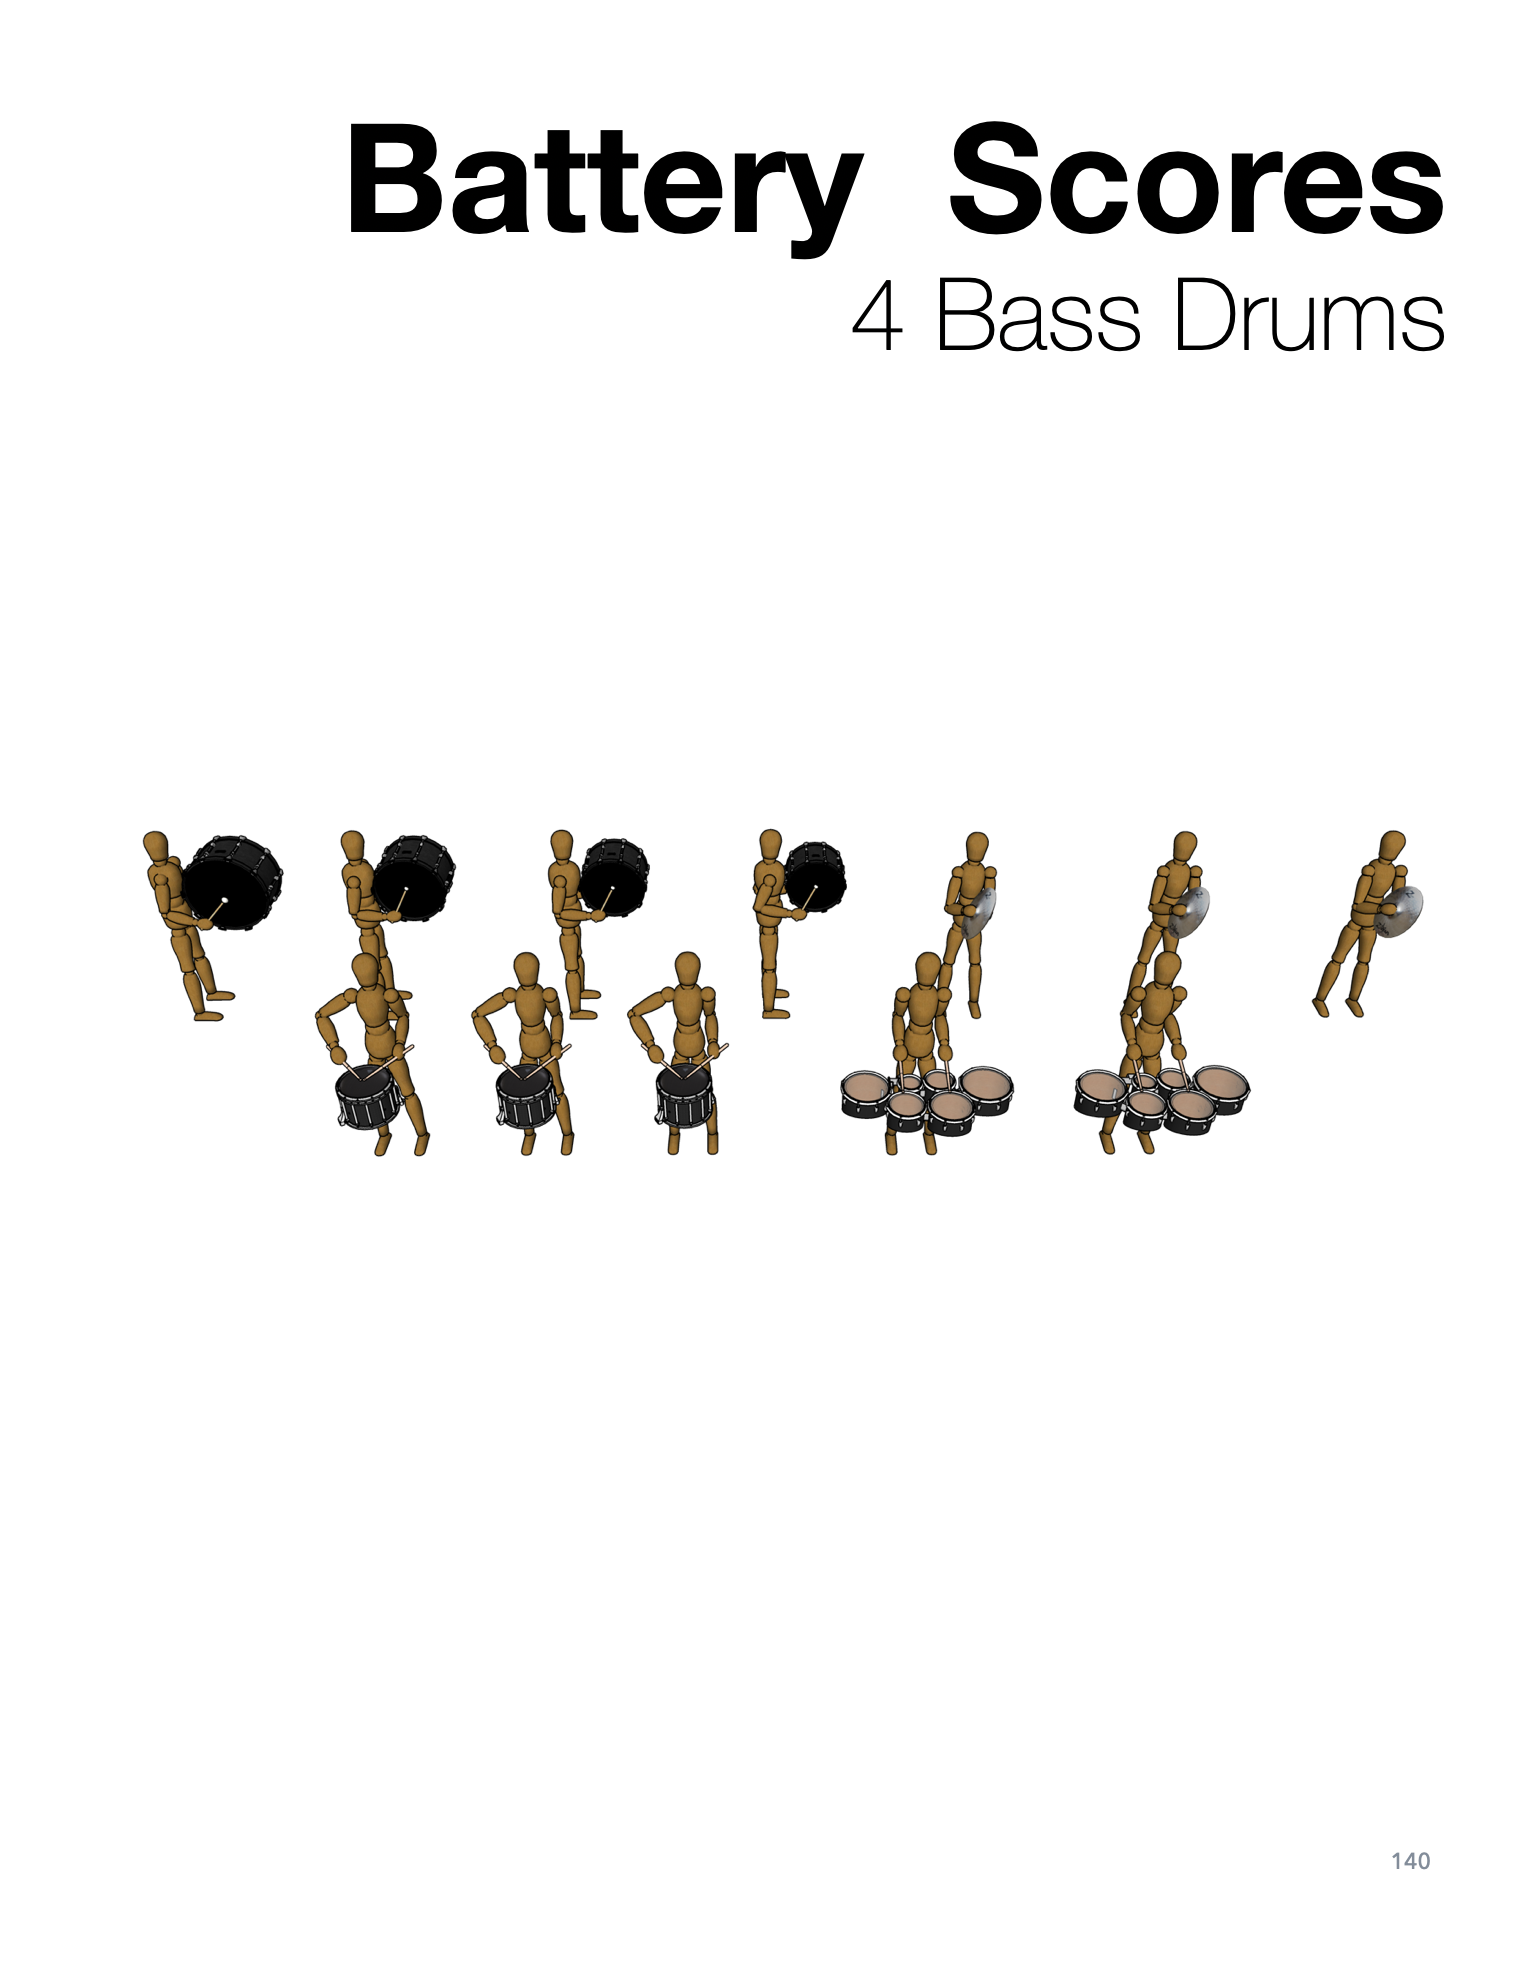 Daily Workout for Drums Book Images - 10.png